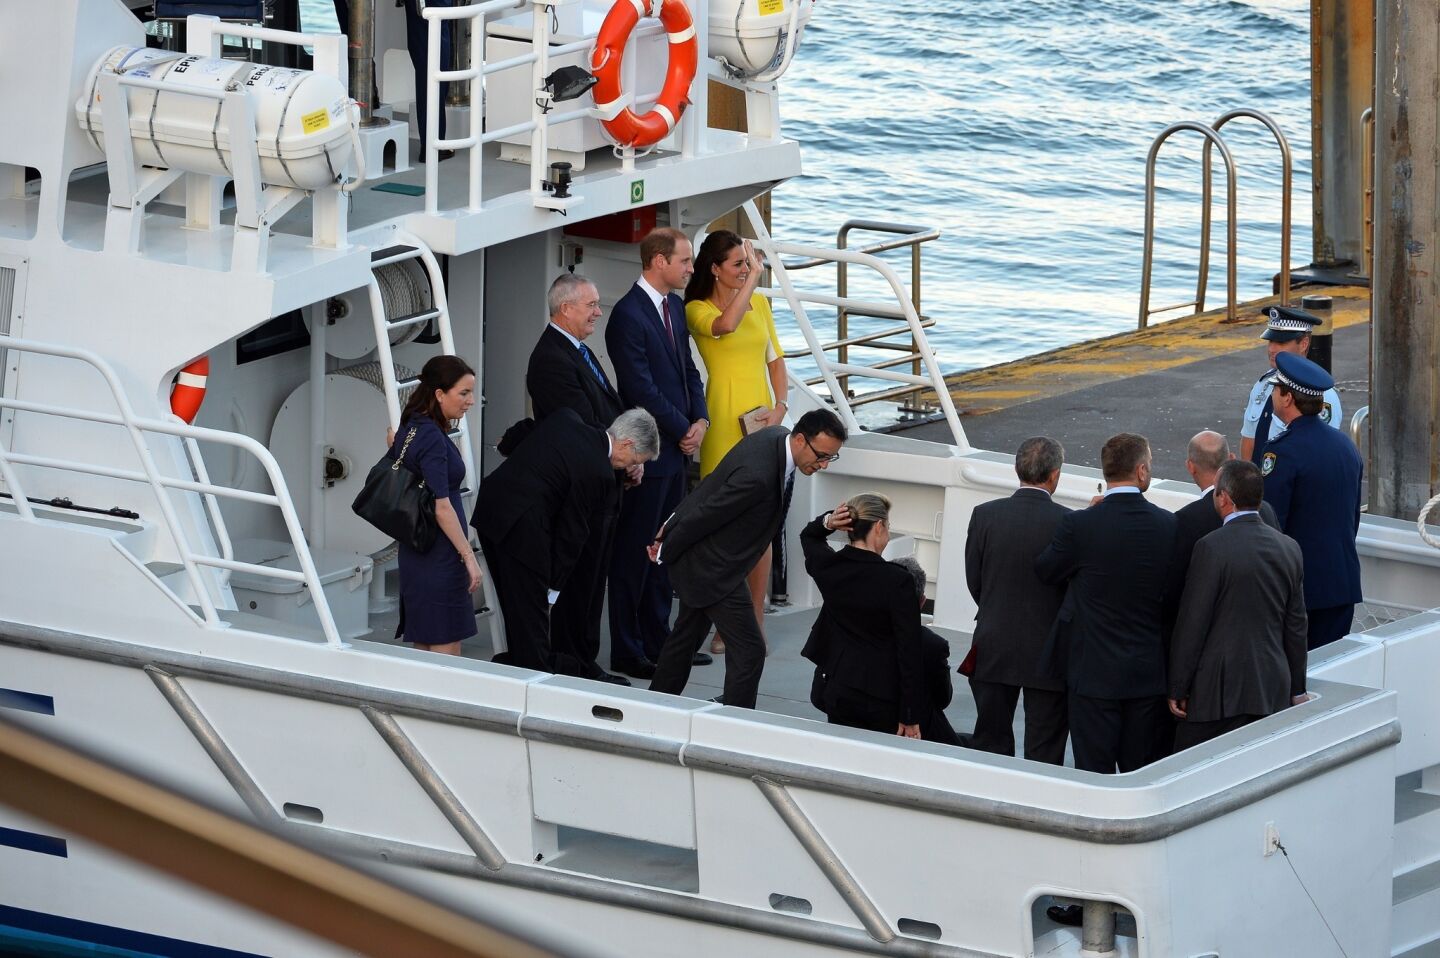 William and Kate depart from the Sydney Opera House by boat for a trip to Admiralty House in Sydney.